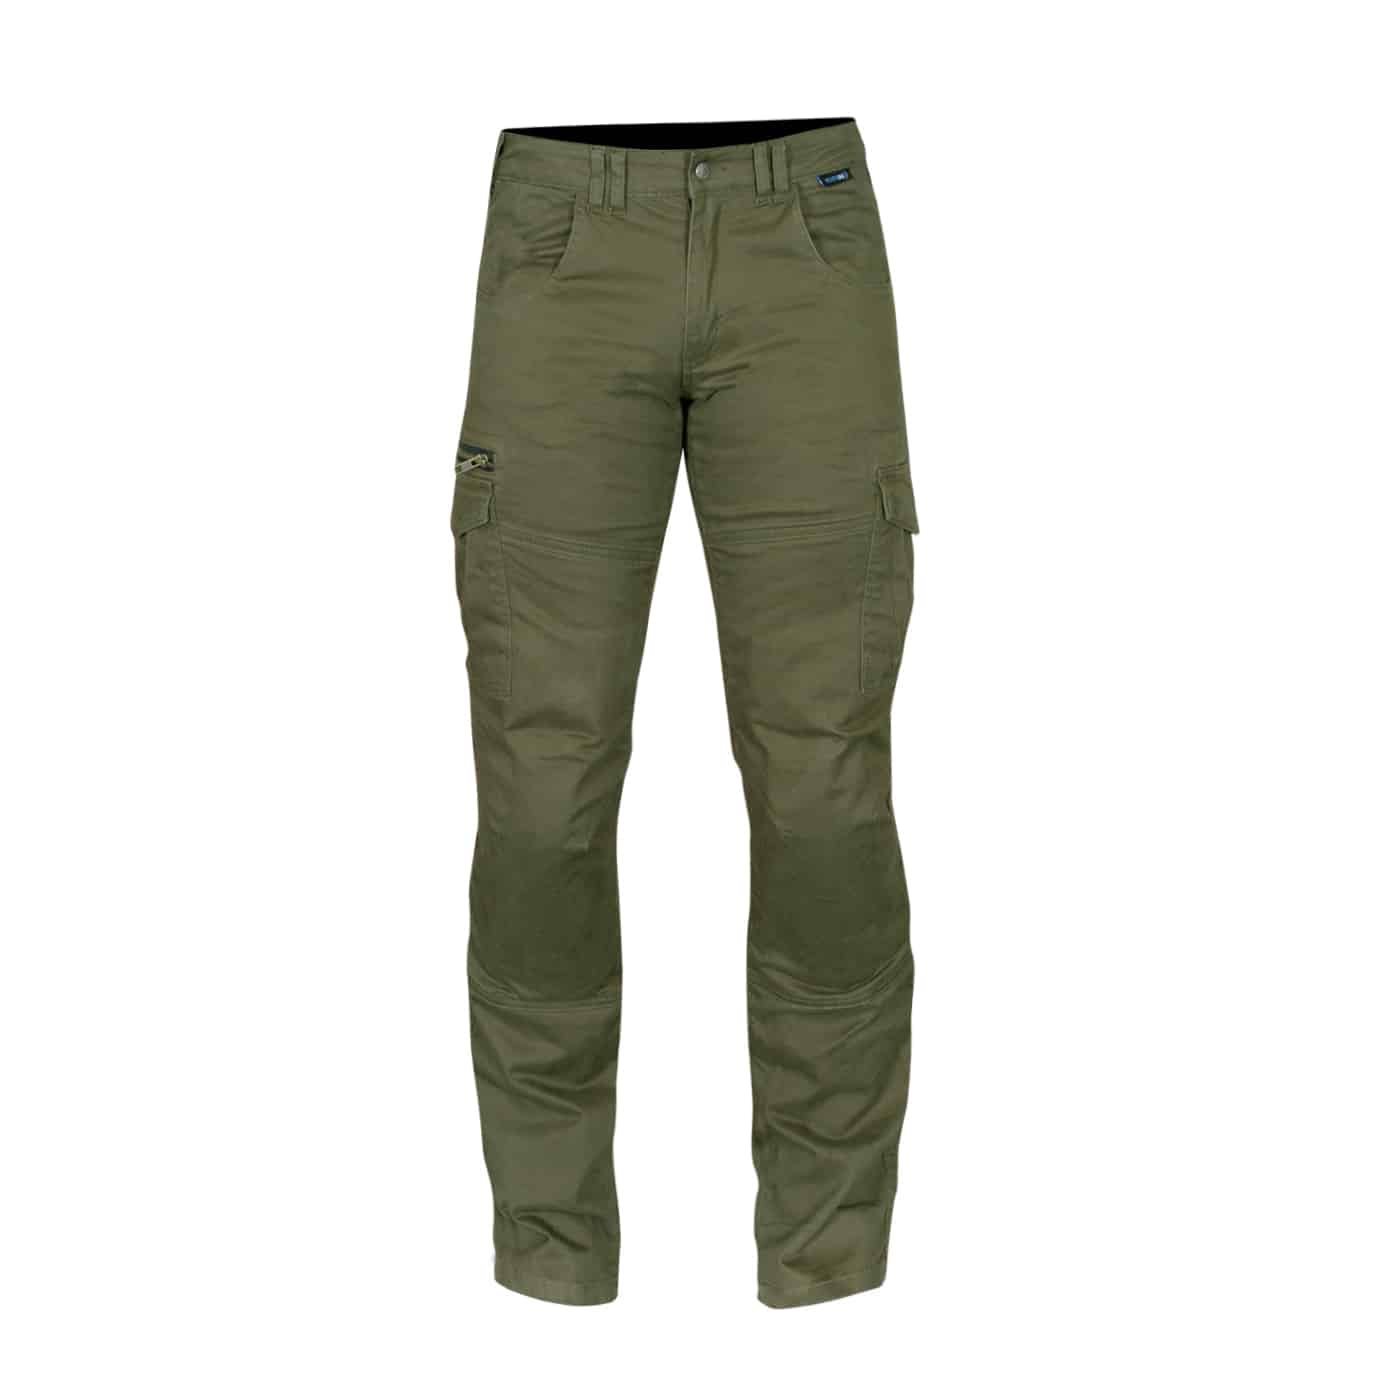 Route One Merlin Remy cargo protective motorcycle jean in green